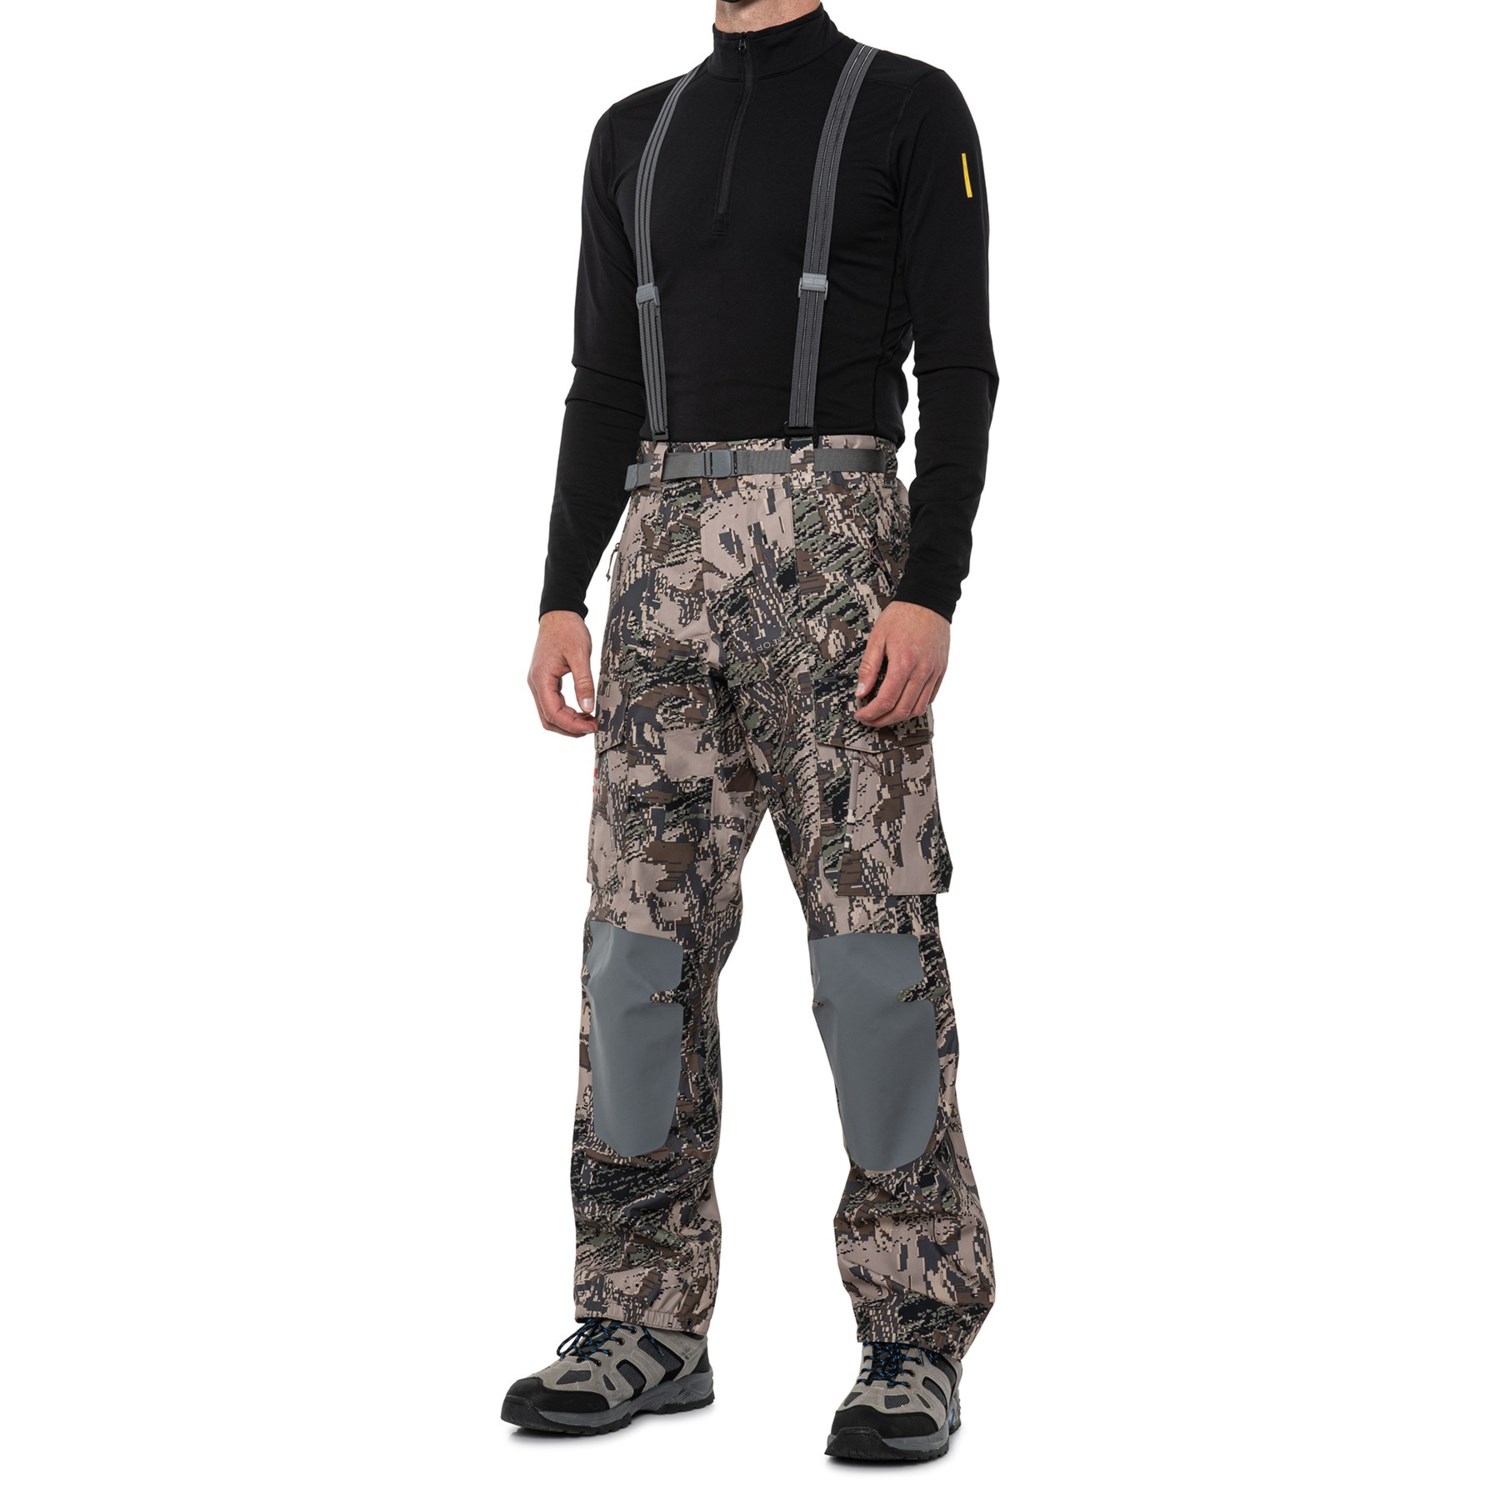 New Sitka Stormfront Gore Tex Pant/Bib Waterproof Open Country Camo Hunting XL 